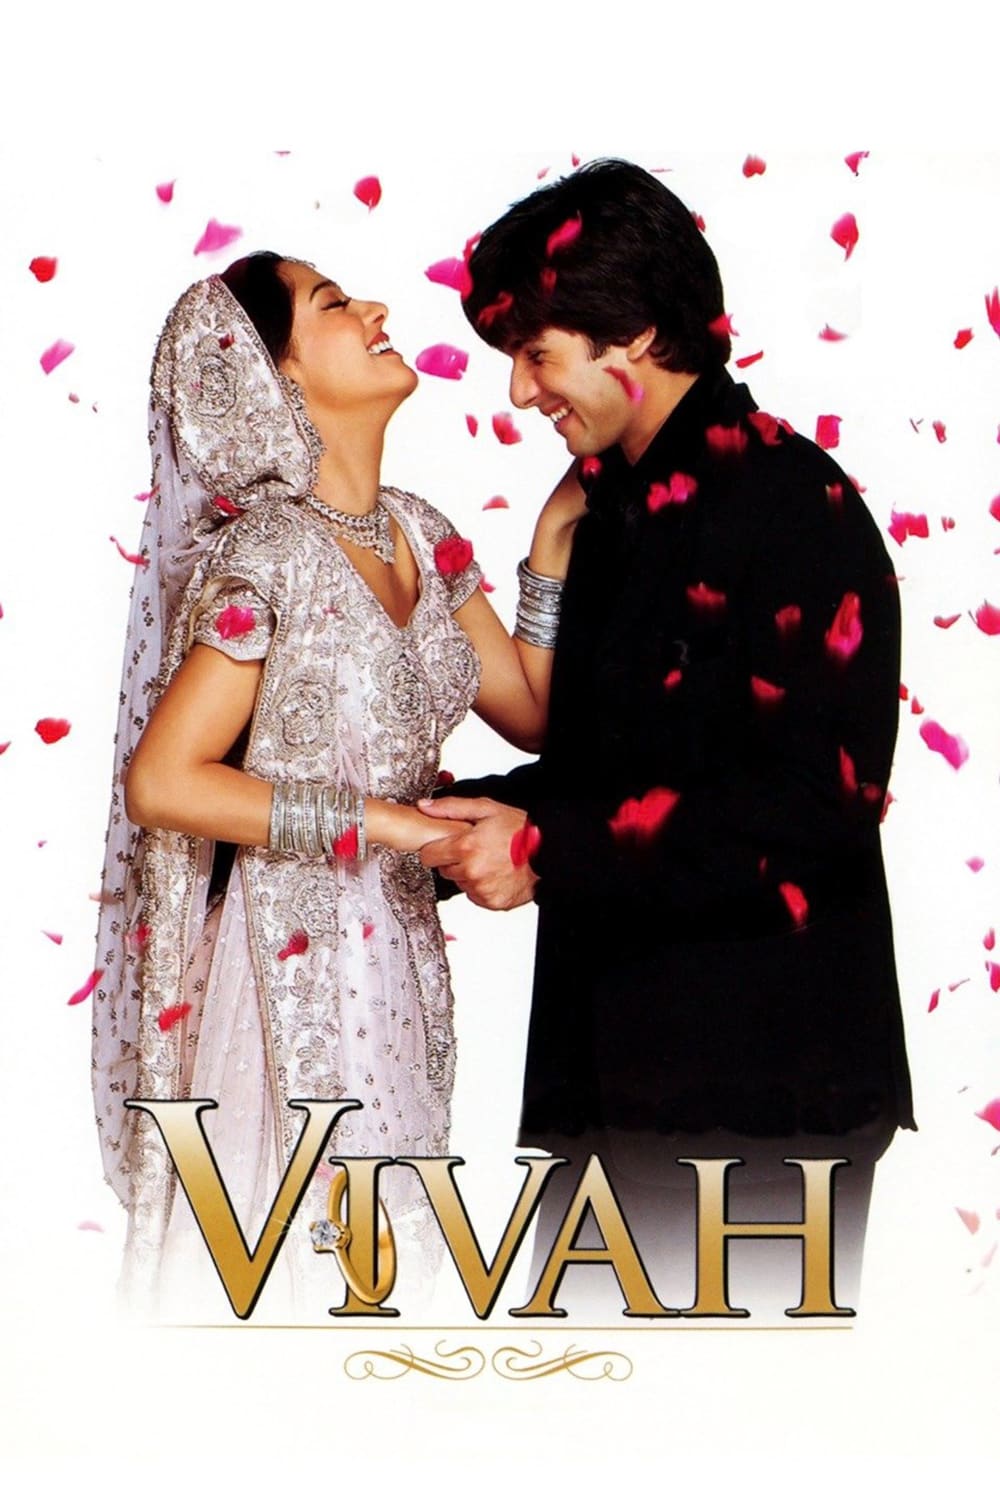 Poster for the movie "Vivah"